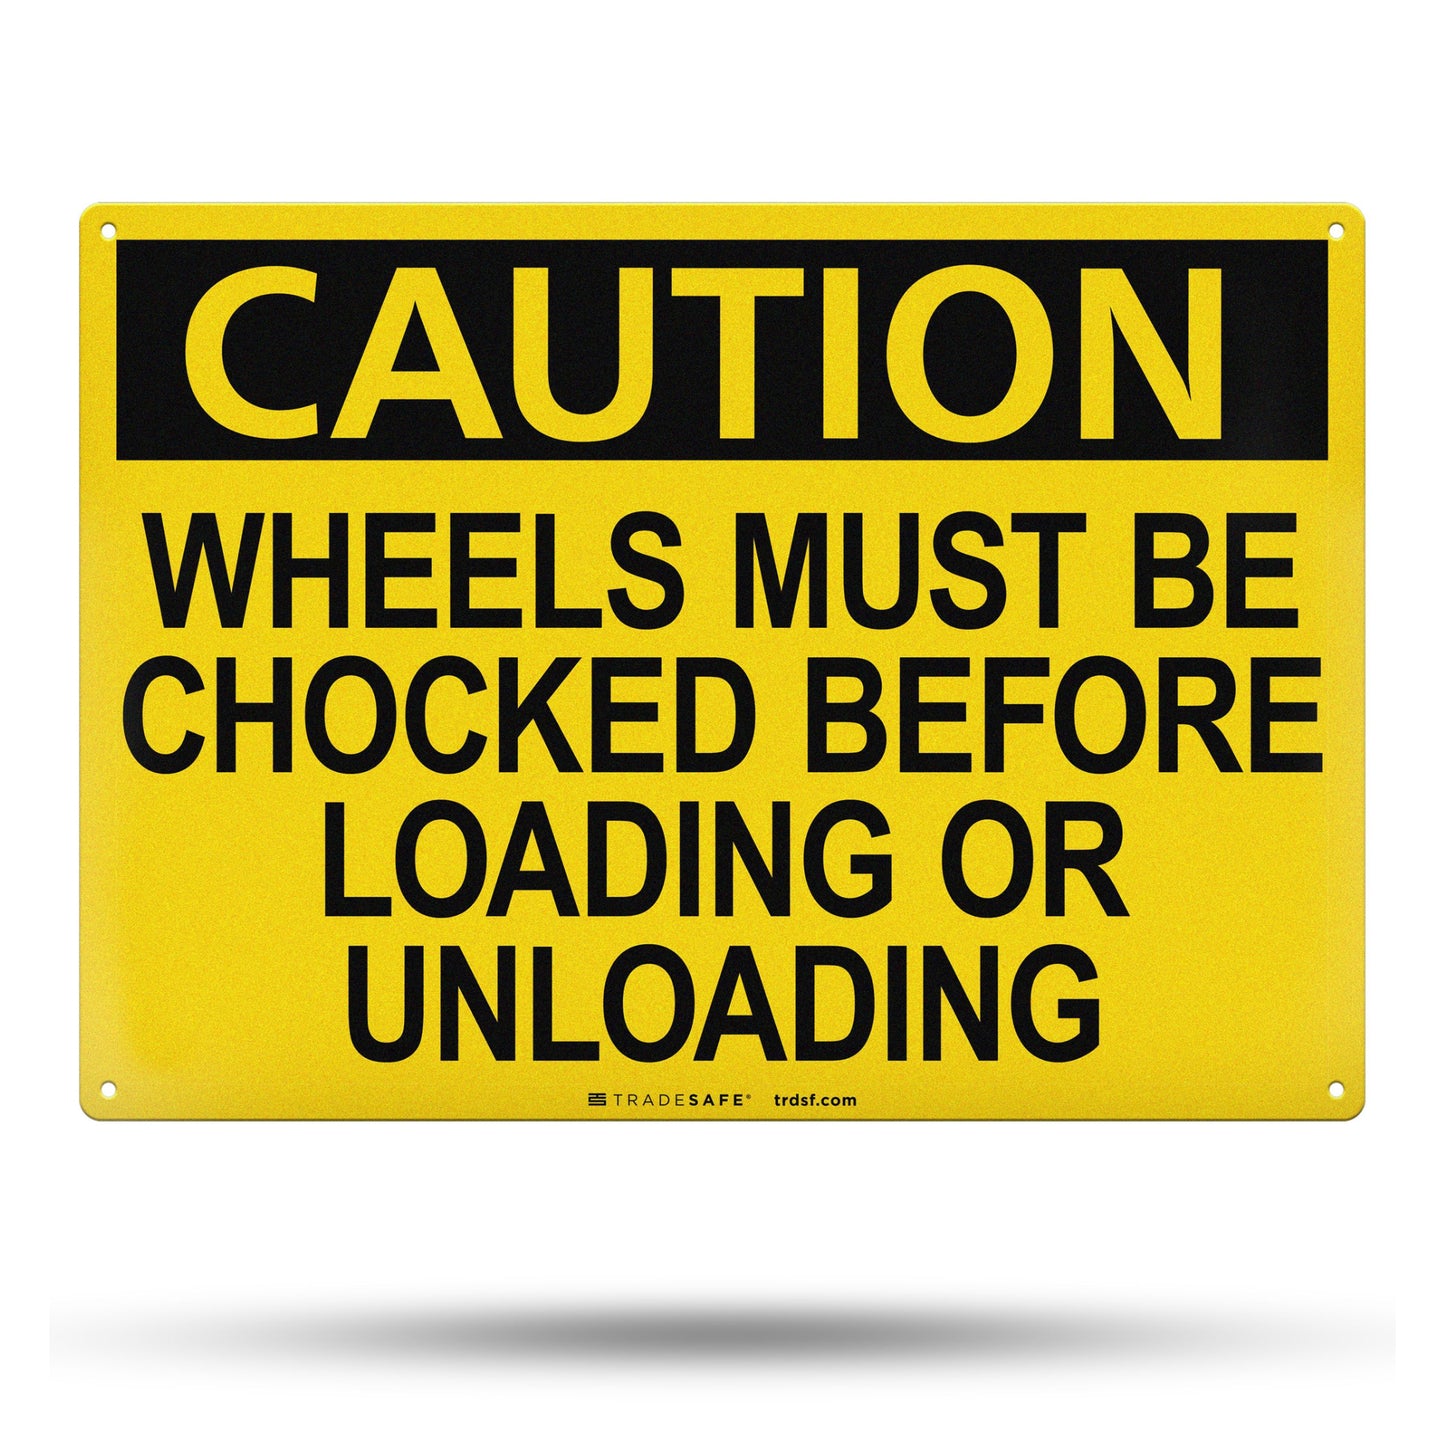 caution wheels must be chocked before loading or unloading sign